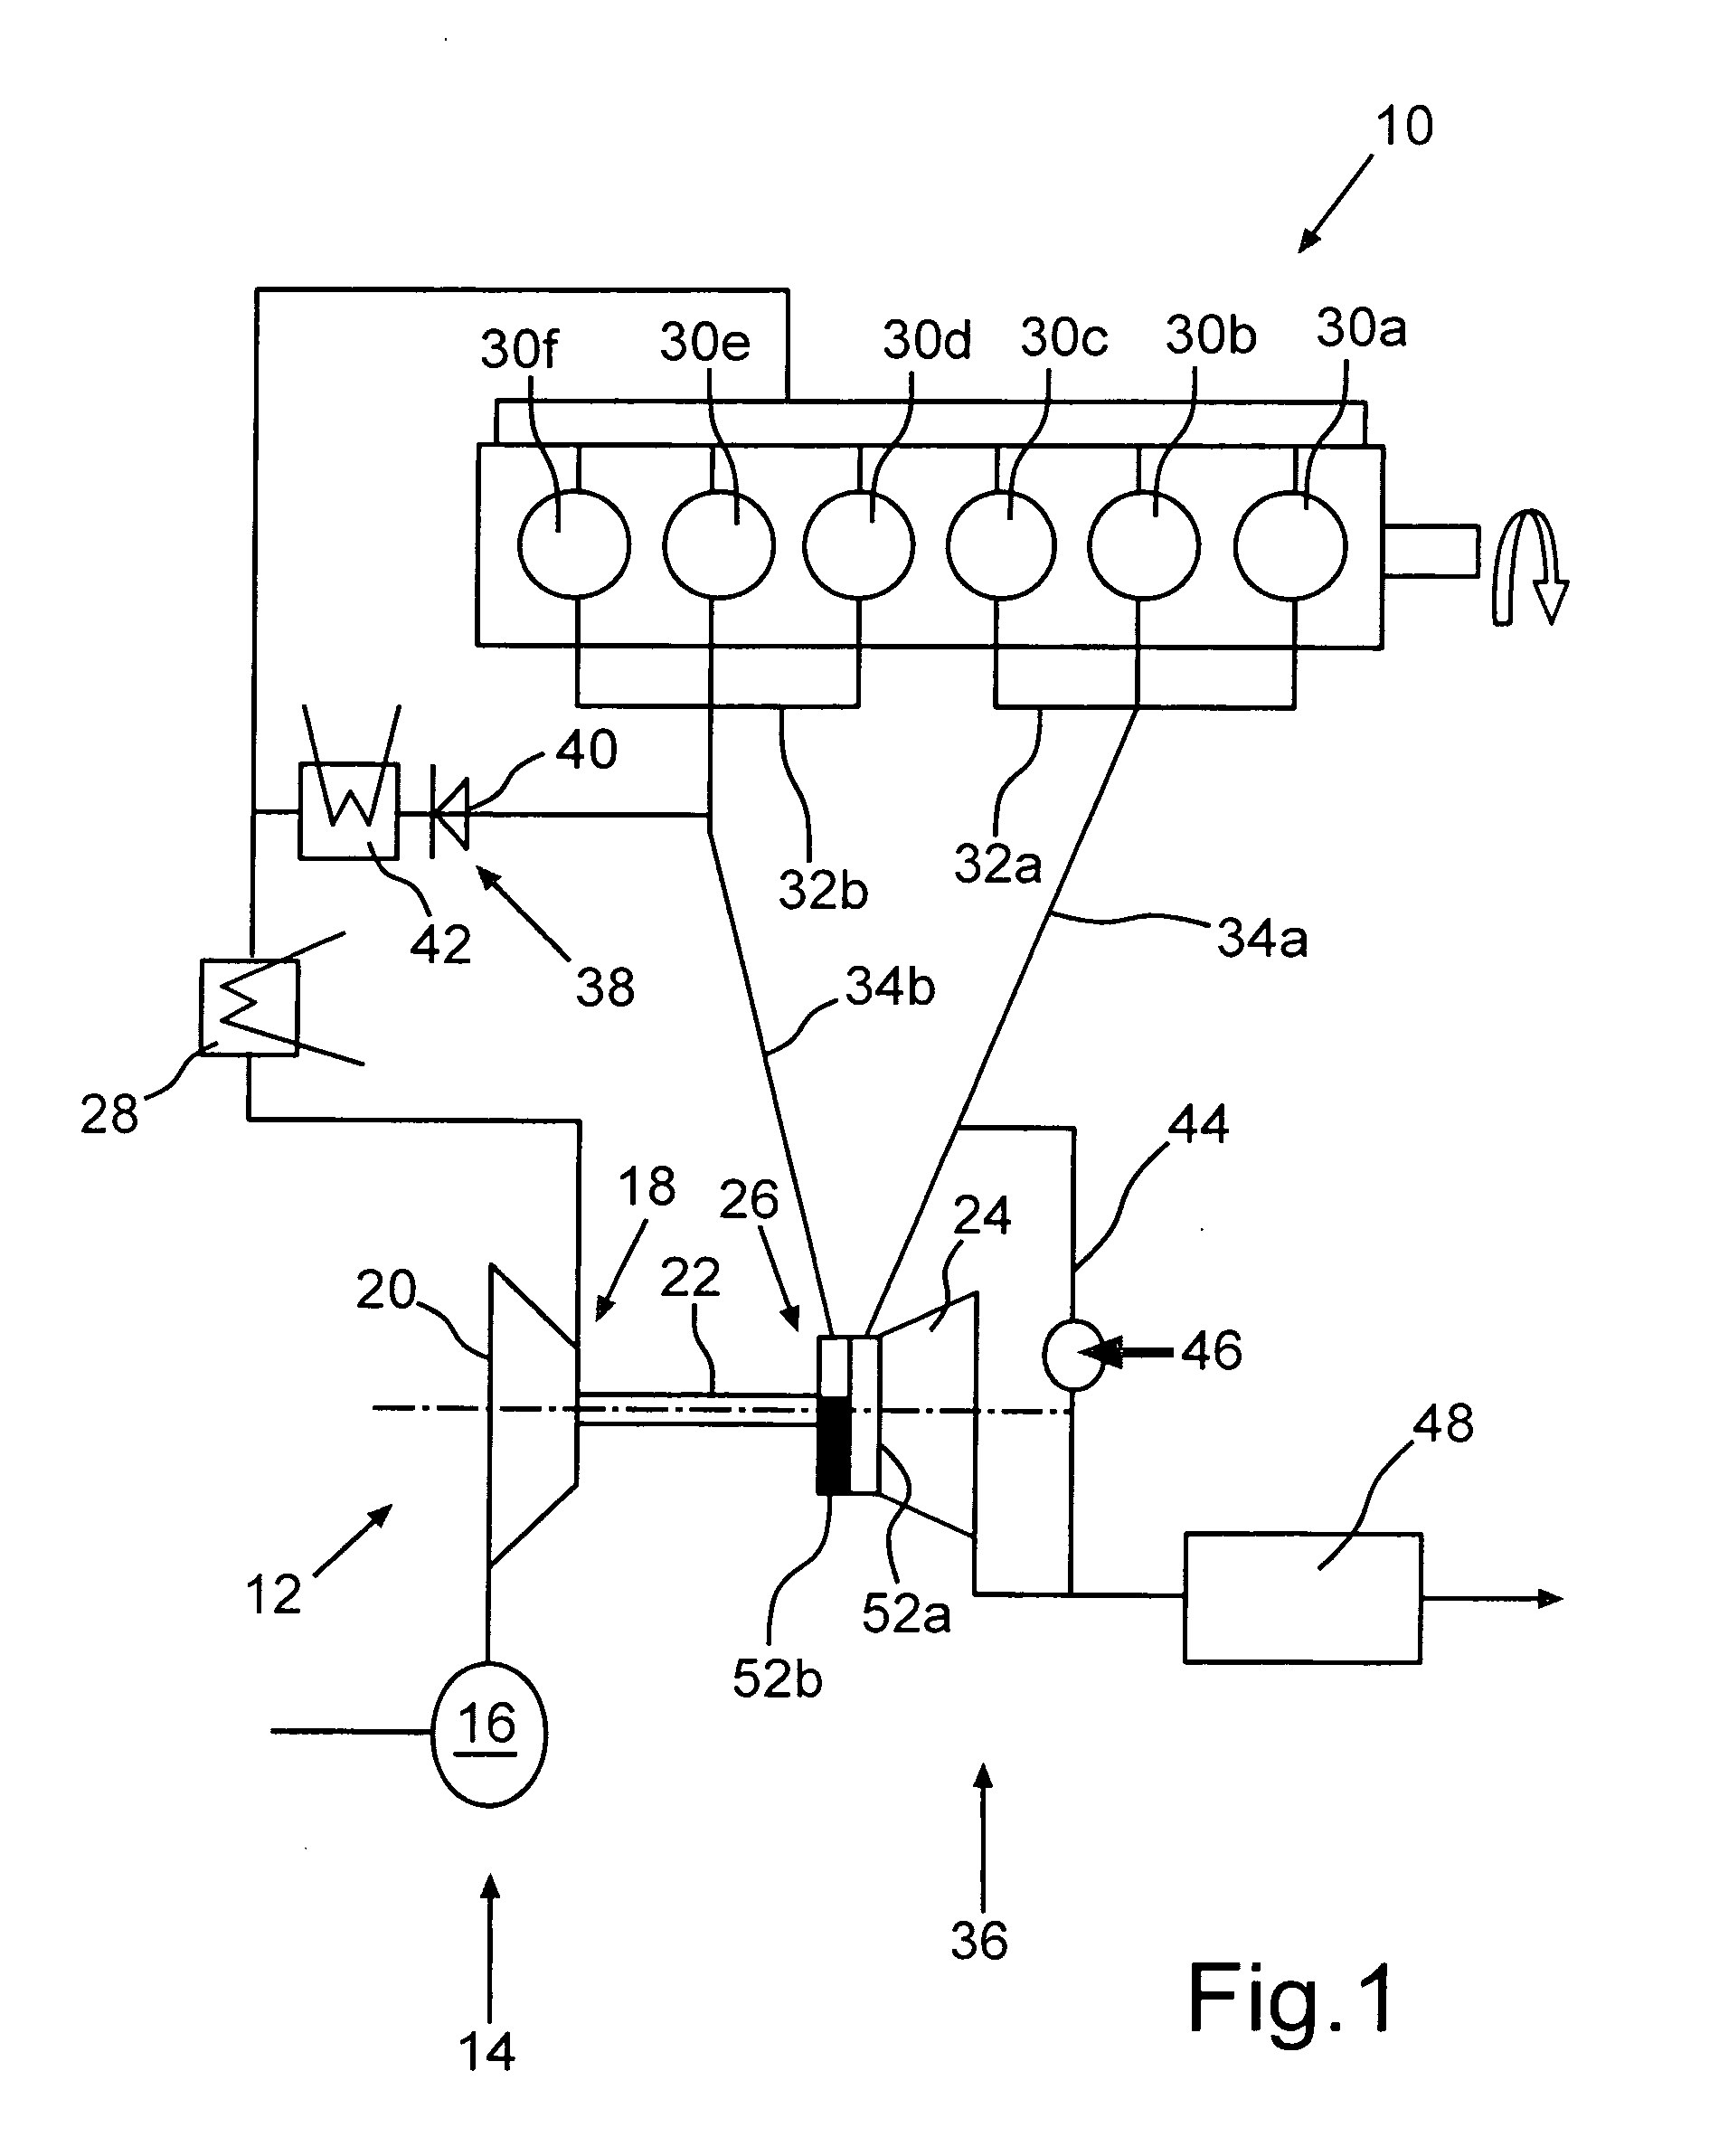 Exhaust gas turbocharger for an internal combustion engine of a motor vehicle